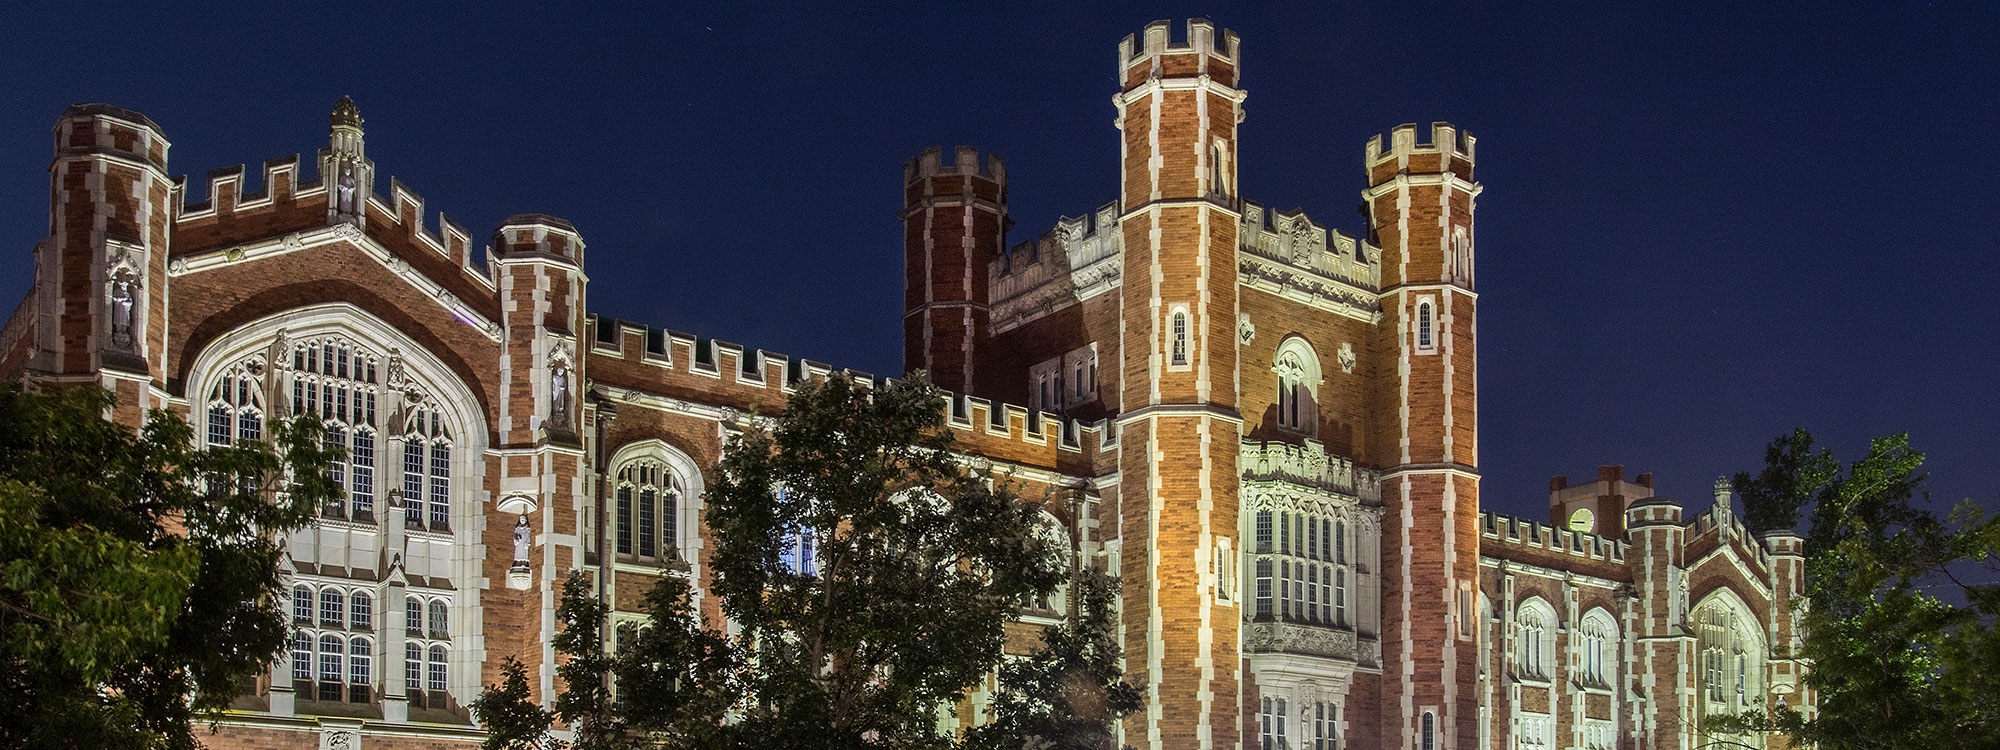 Bizzell Memorial Library at night, surrounded by trees.